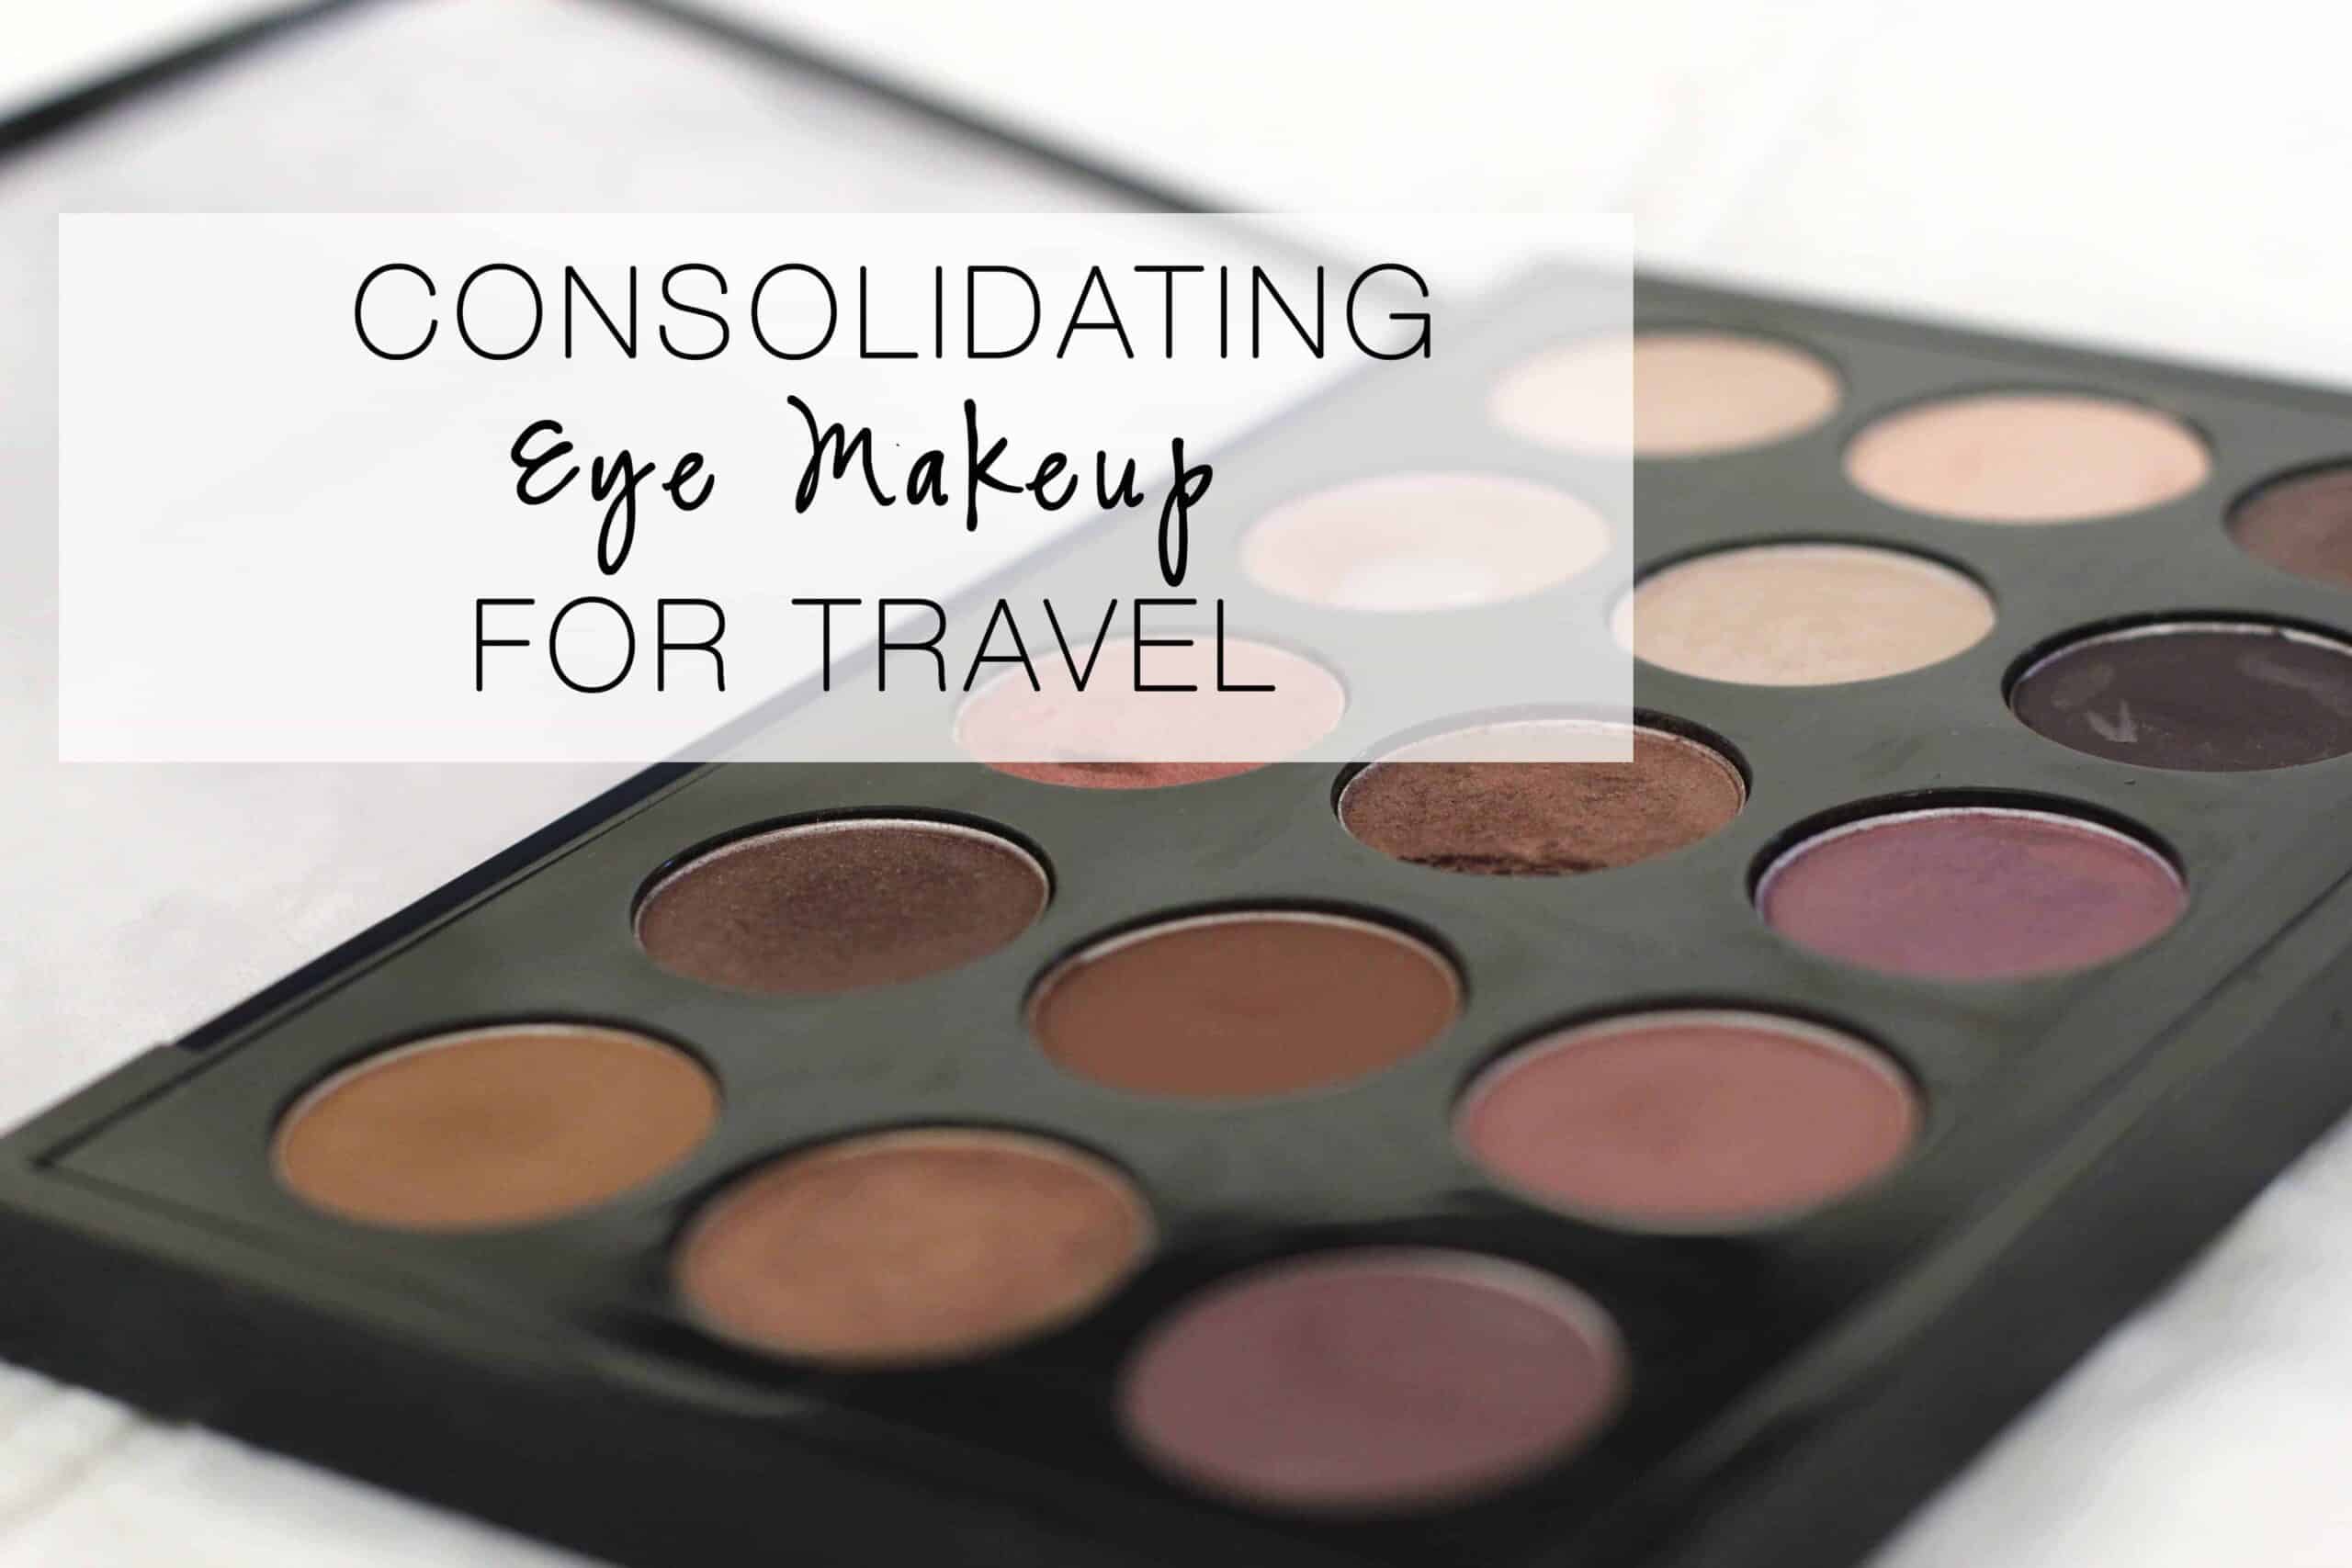 Packing Eye Makeup for Travel